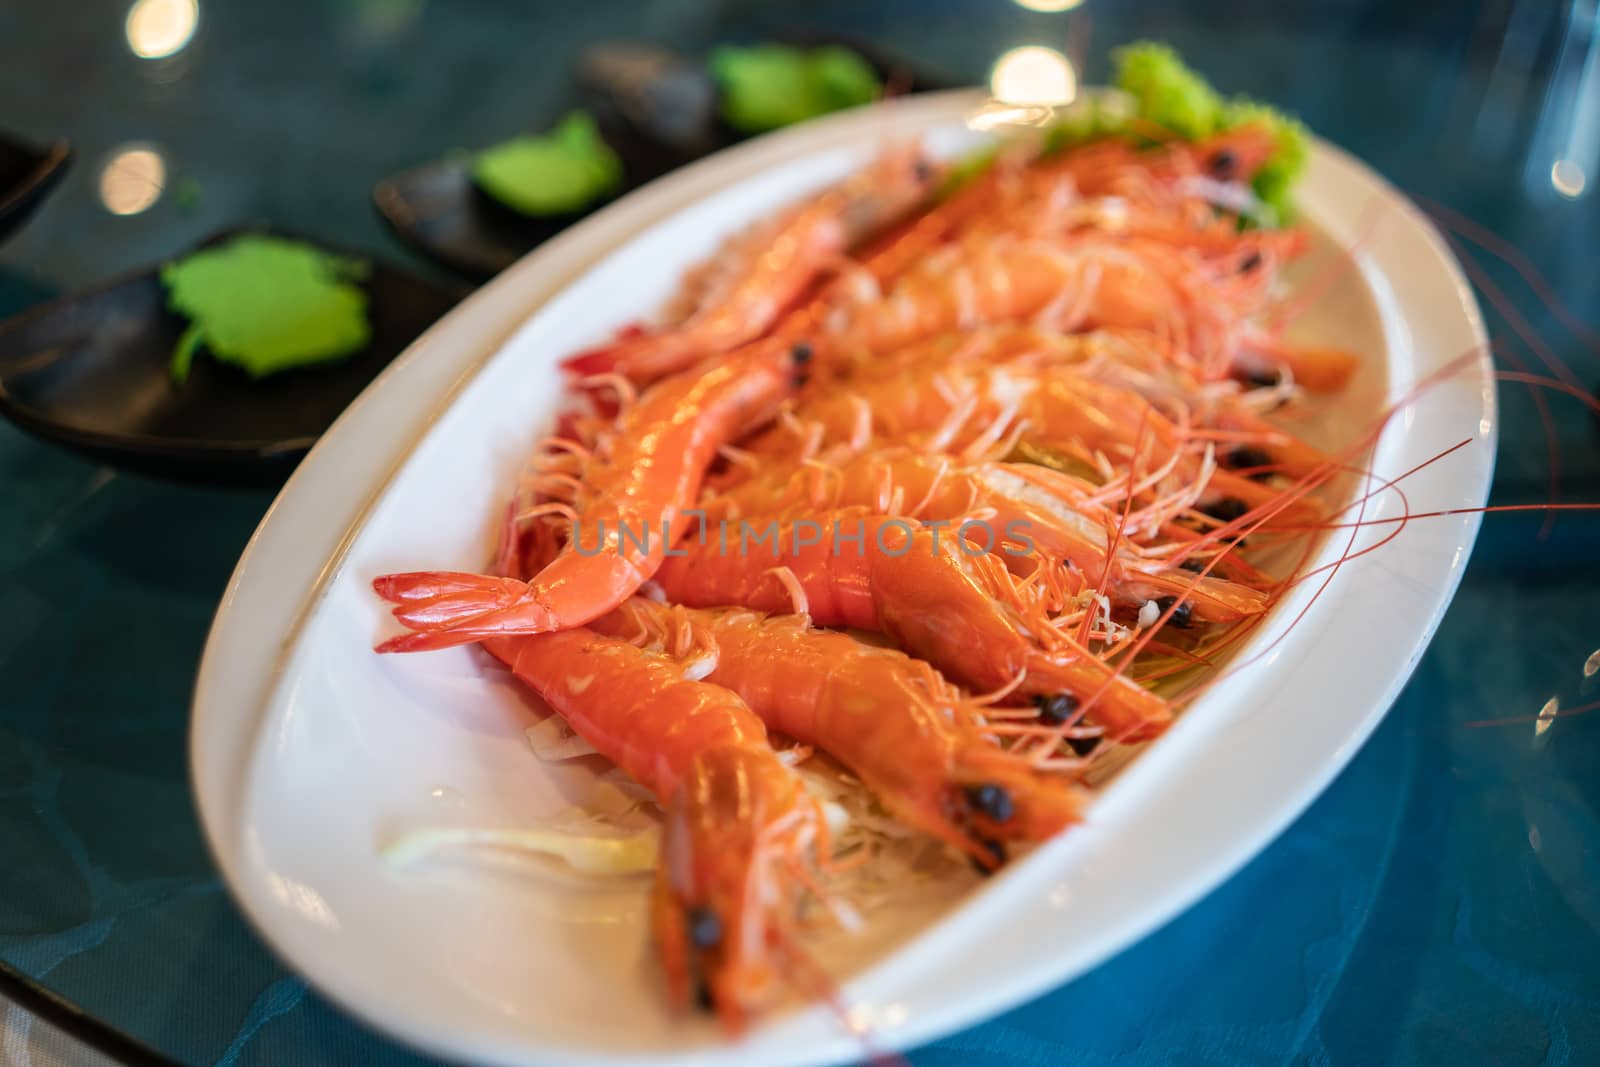 A plate of freshly cooked prawns in a restaurant